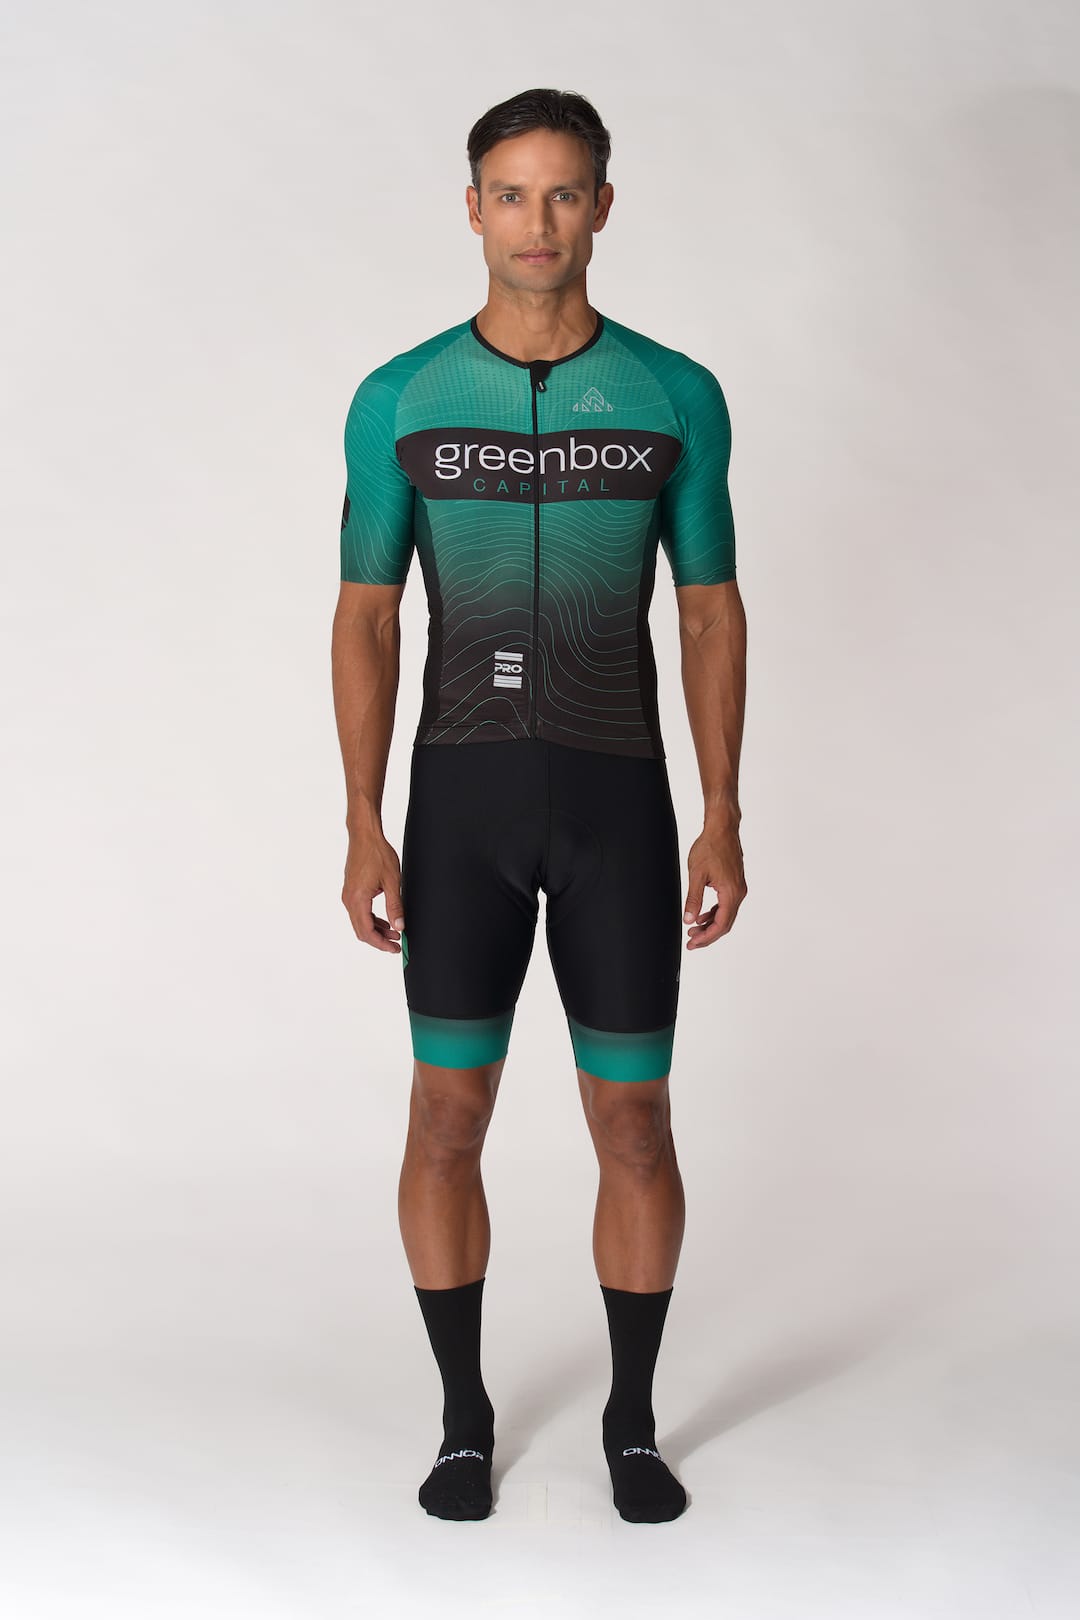 custom cycling skinsuit , customized cycling clothing, custom cycling jersey and shorts